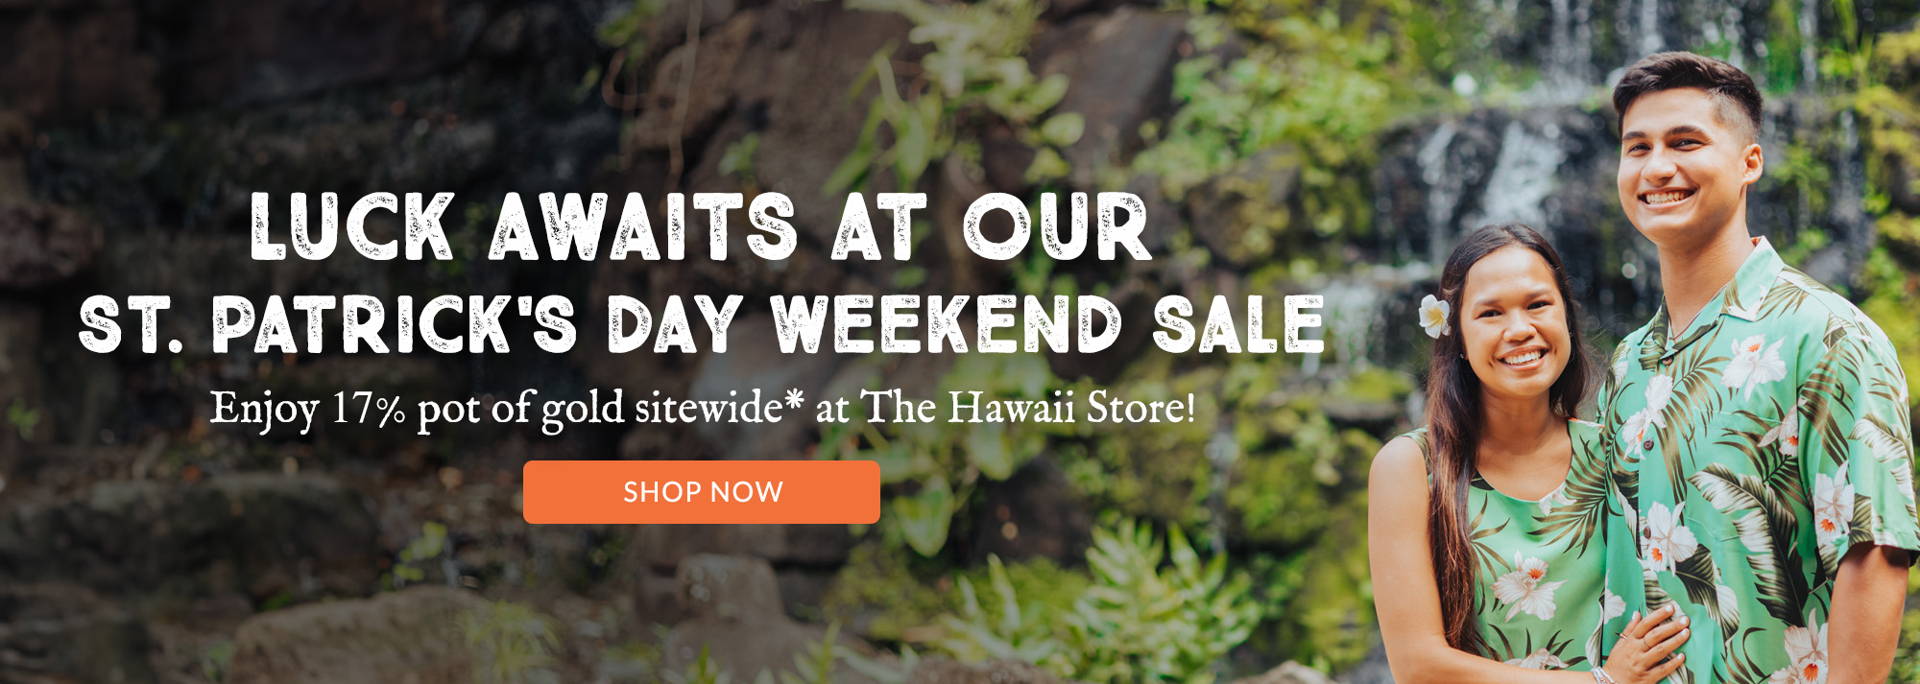 Luck awaits at our St. Patrick's Day Weekend Sale! Enjoy 17% pot of gold sitewide* at The Hawaii Store!